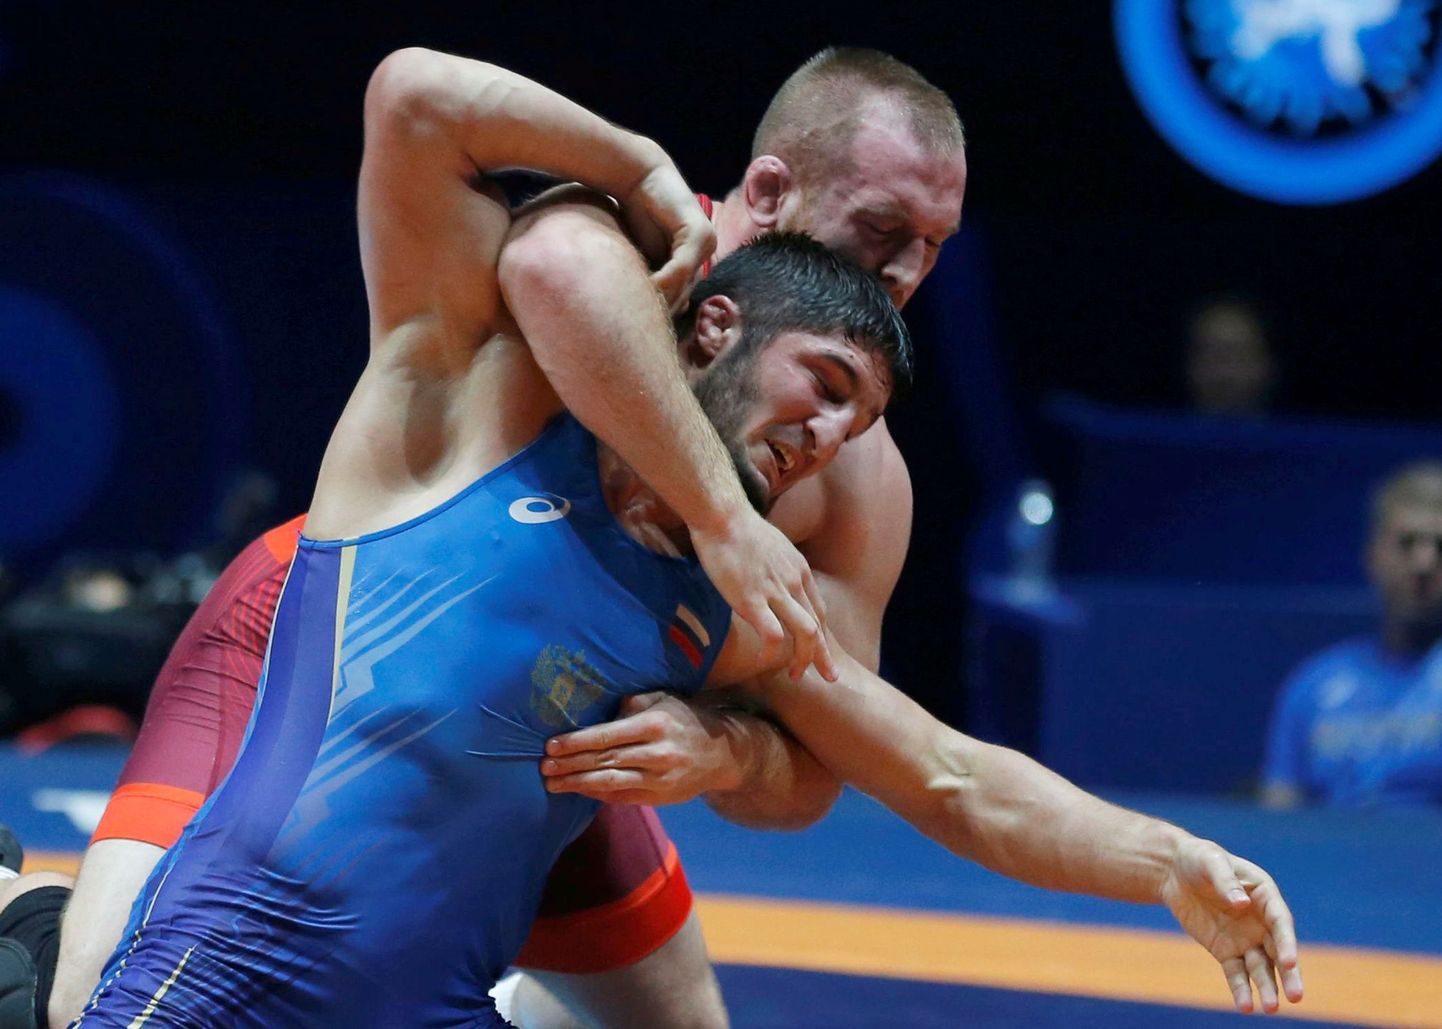 World Wrestling Championships - Final - Men's Freestyle 97 kg - AccorHotels Arena, Paris, France - August 26, 2017.  Kyle Frederick Snyder of U.S competes with Russia Abdulrashid Sadulaev as he wins gold medal. REUTERS/Regis Duvignau